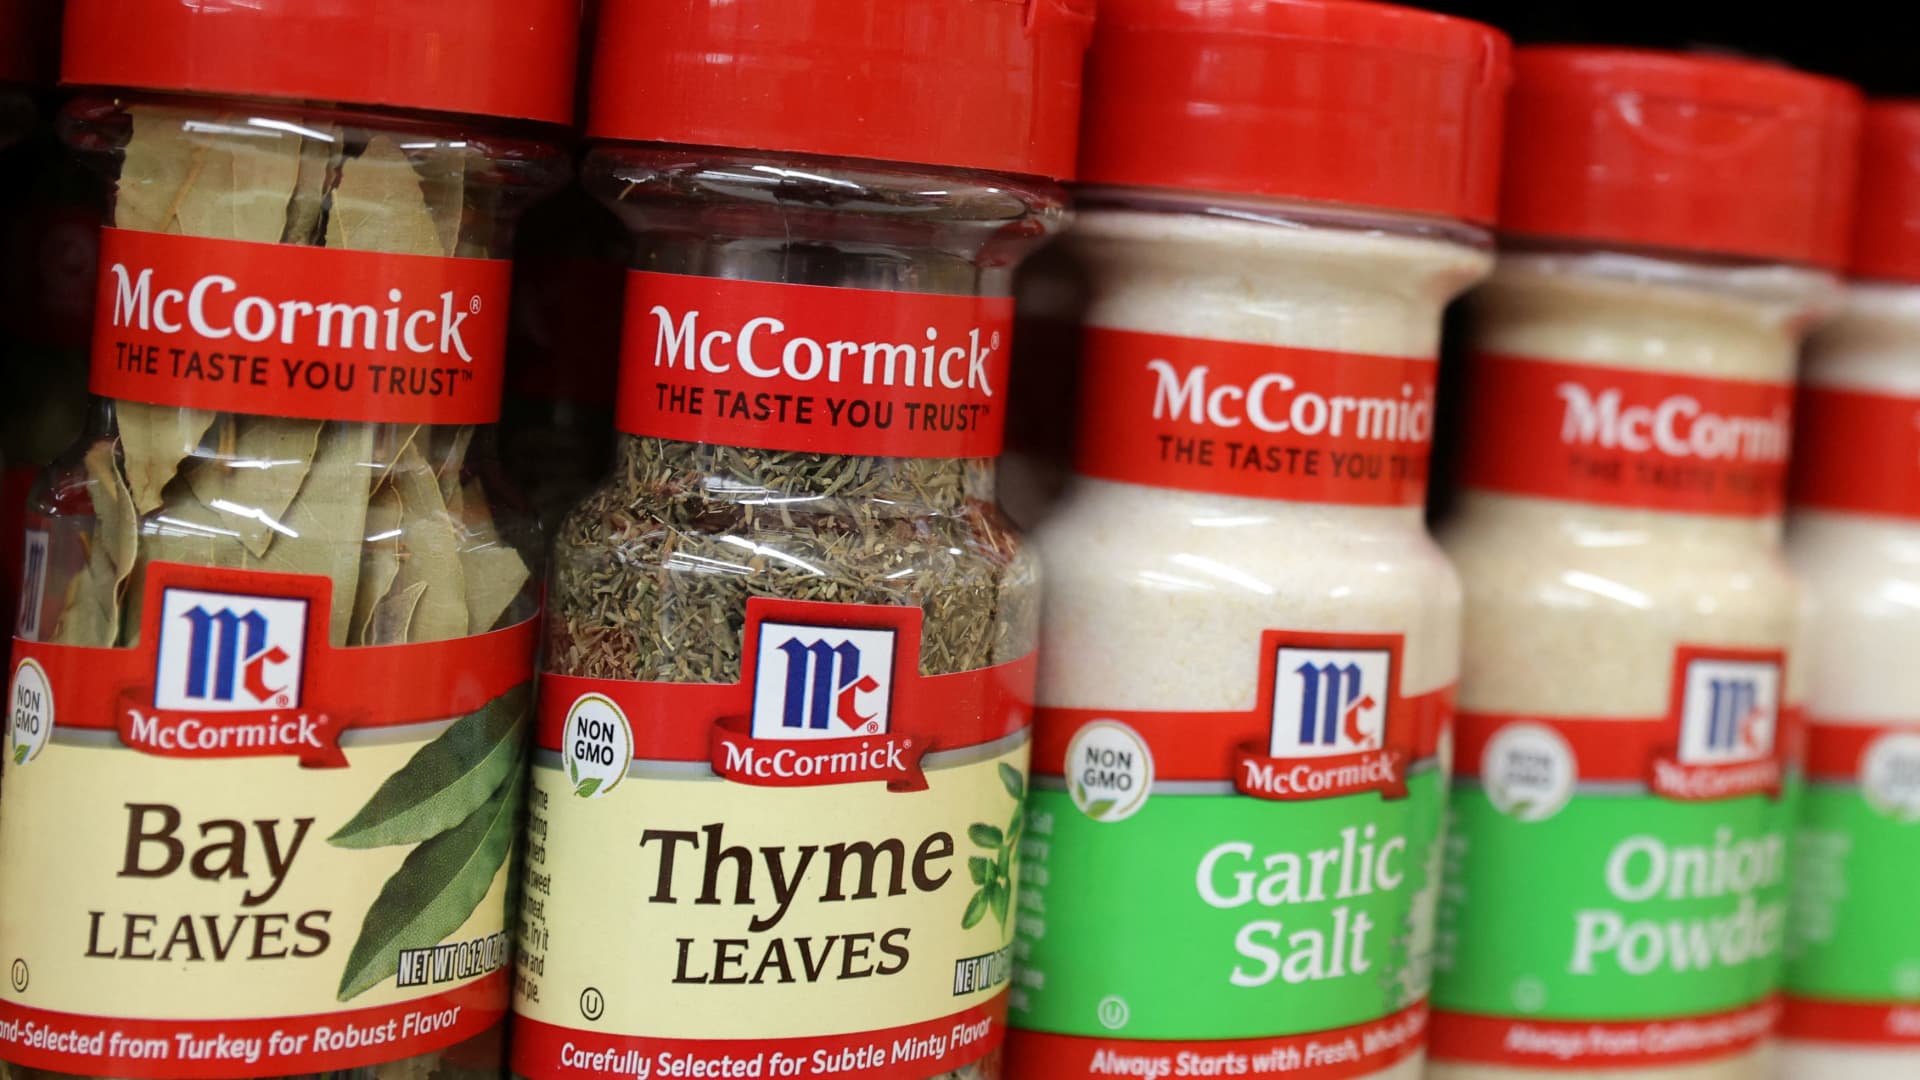 McCormick & Company spices are seen on display in a store in New York City on March 29, 2022.